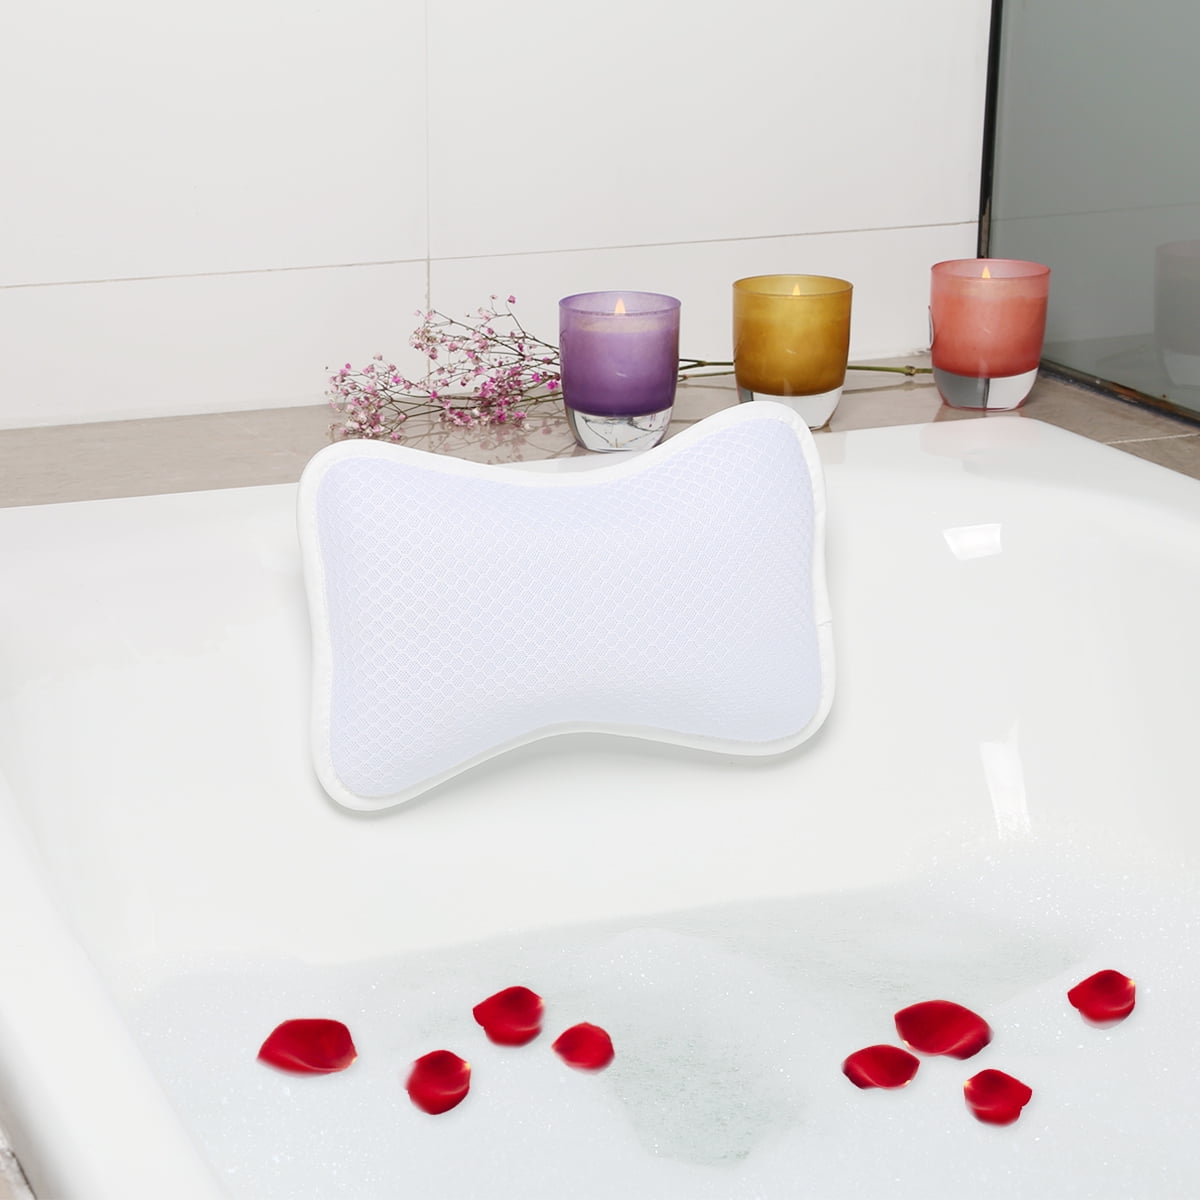 Yaoping Bath Pillow, Bathtub Pillow with Suction Cups, Non-Slip Bathroom Cushion Inflatable Bathroom Pillow for Headrest and Neck Support